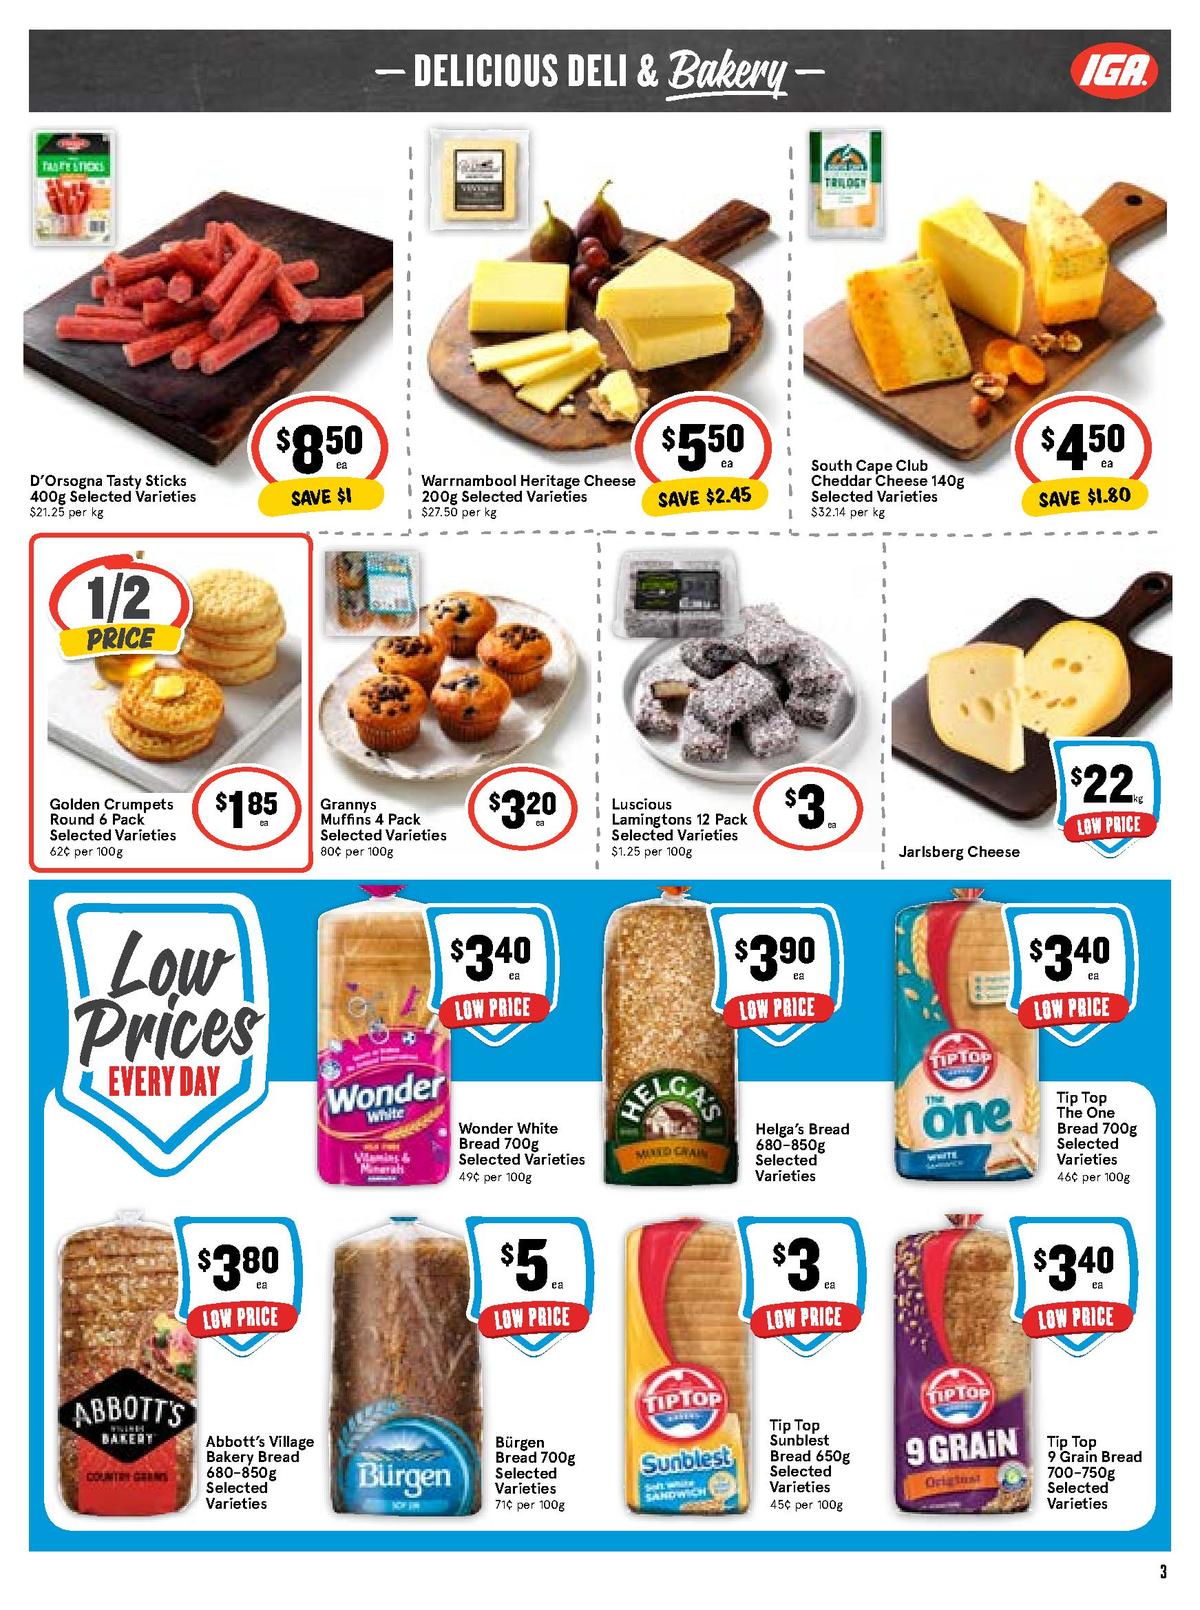 IGA Catalogues from 2 October